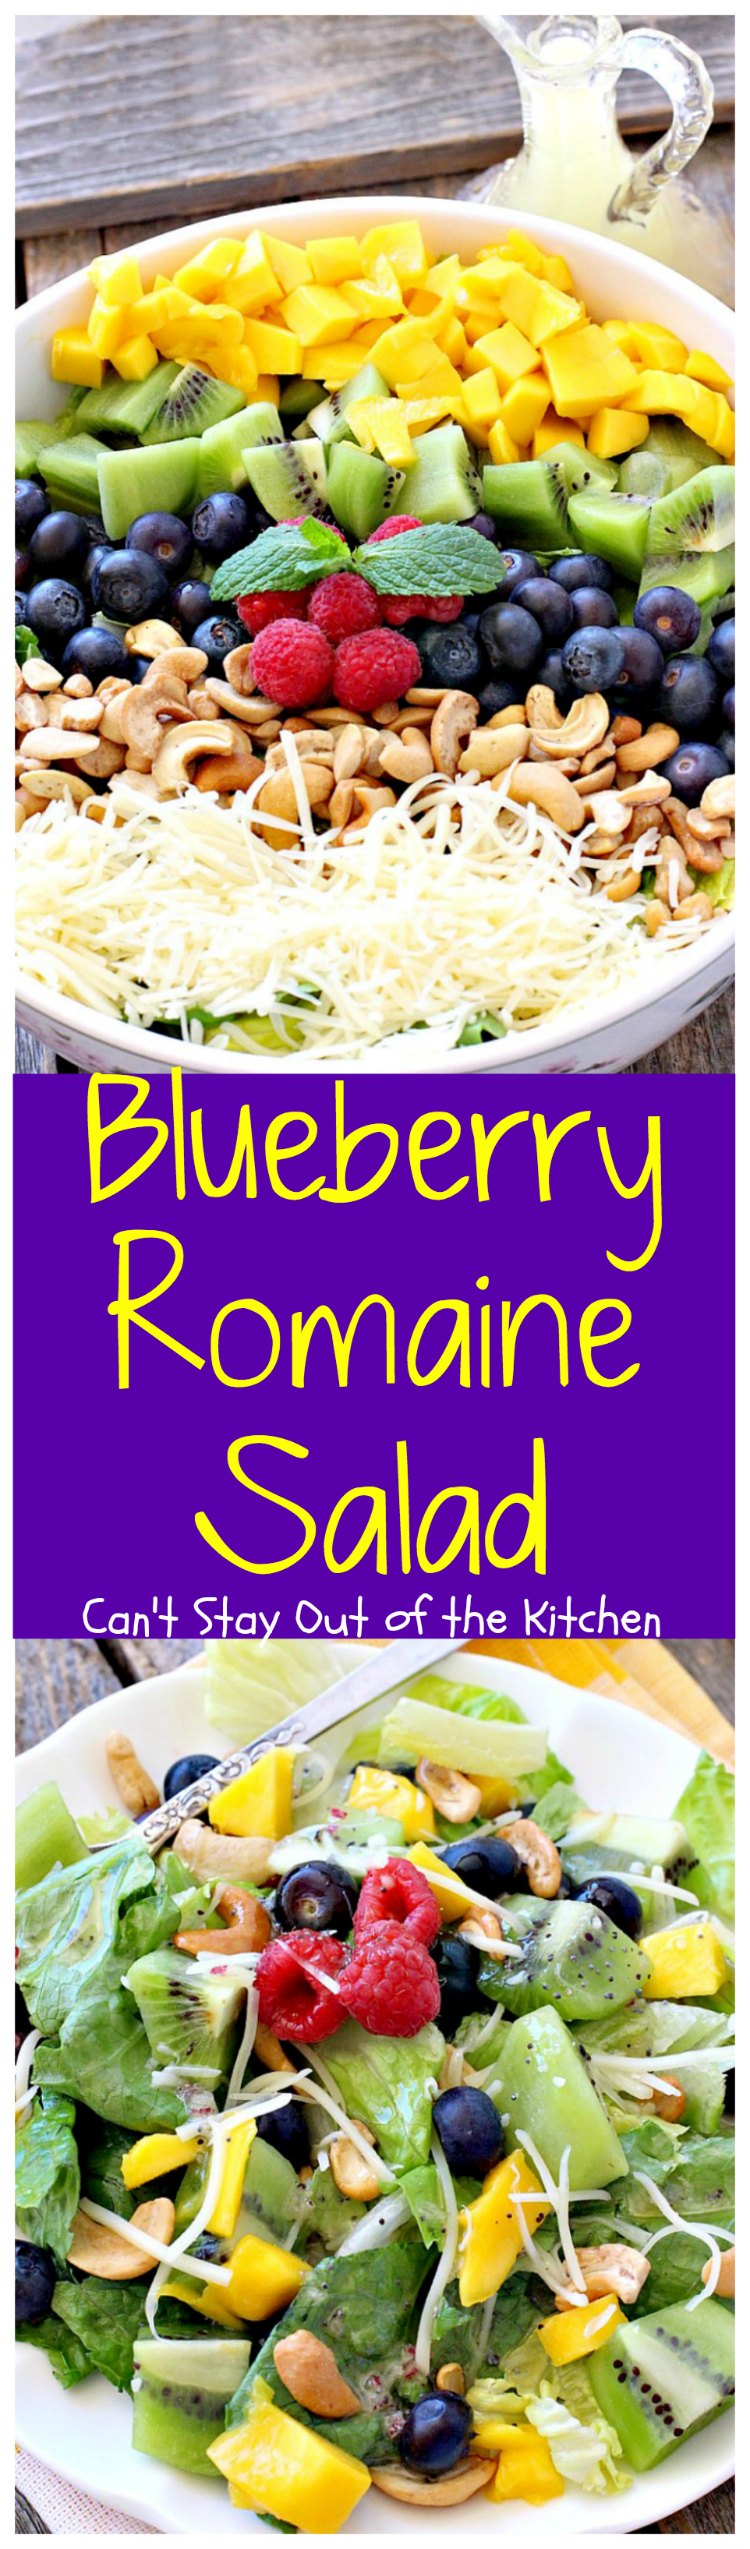 Blueberry Romaine Salad | Can't Stay Out of the Kitchen